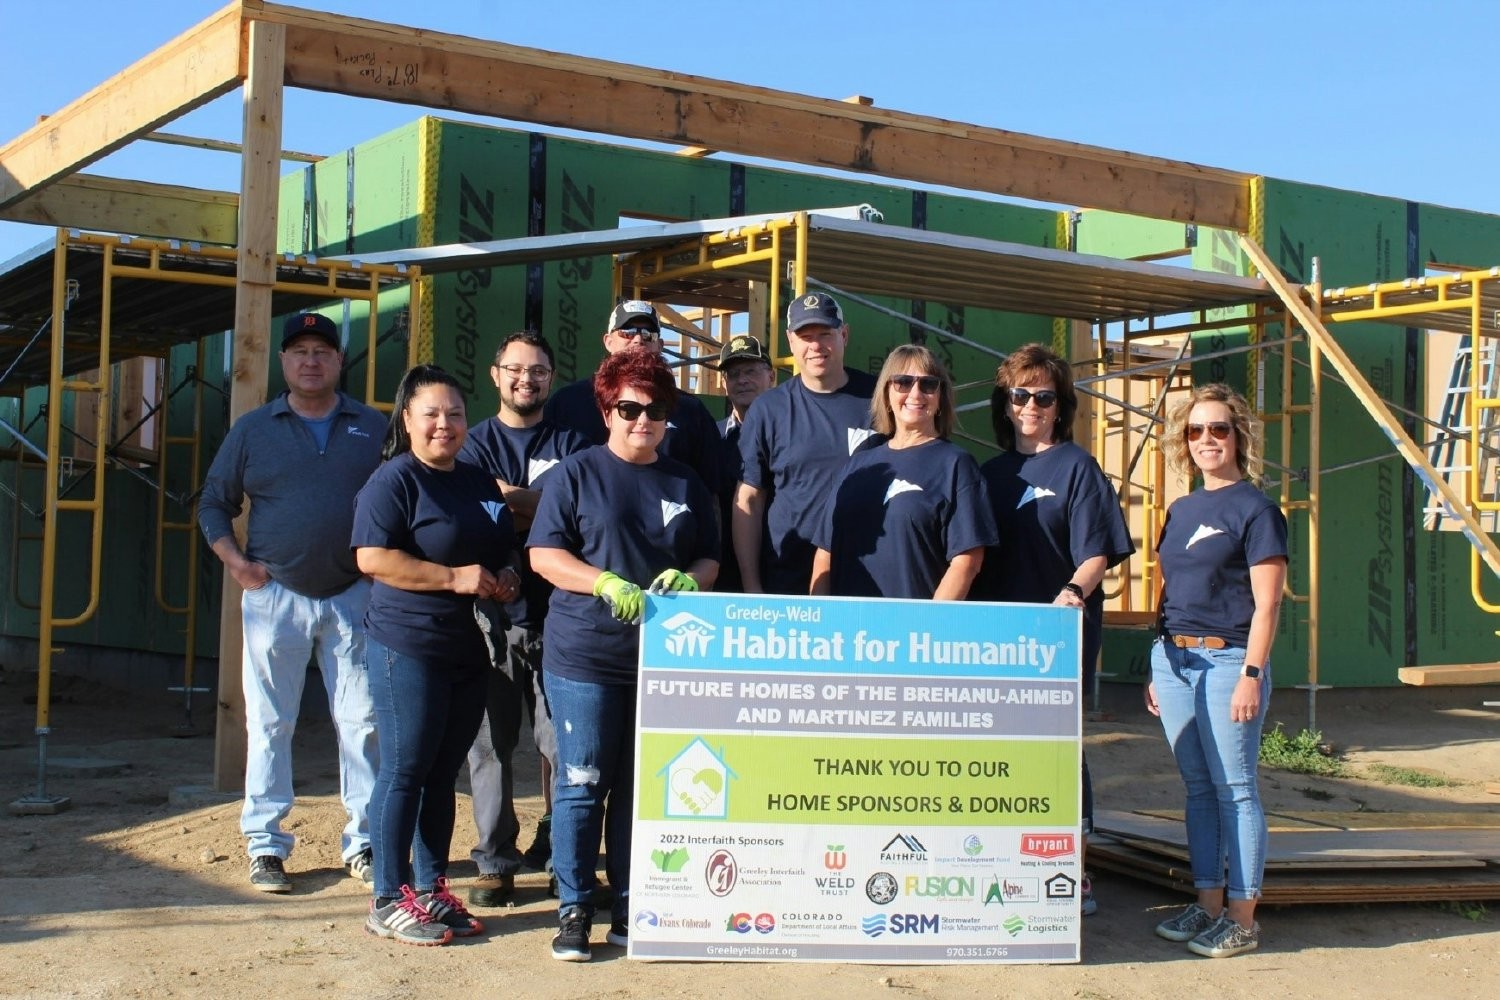 Spending the day with Habitat for Humanity